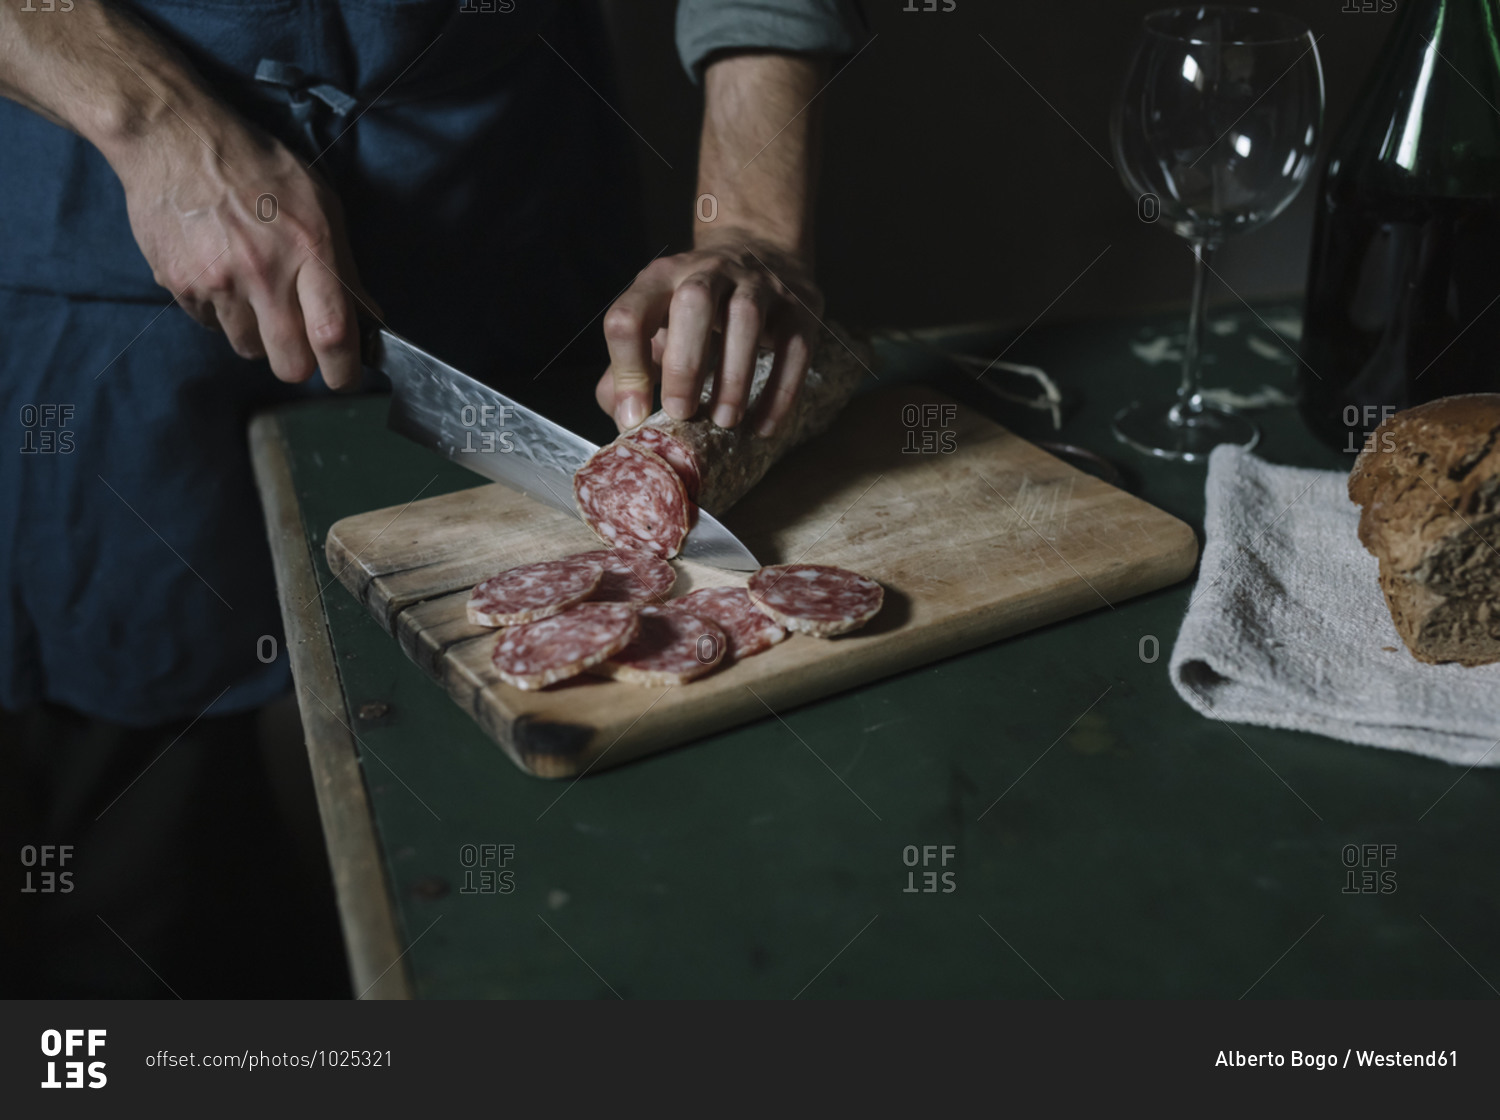 Hands of man cutting salami slices on board at table